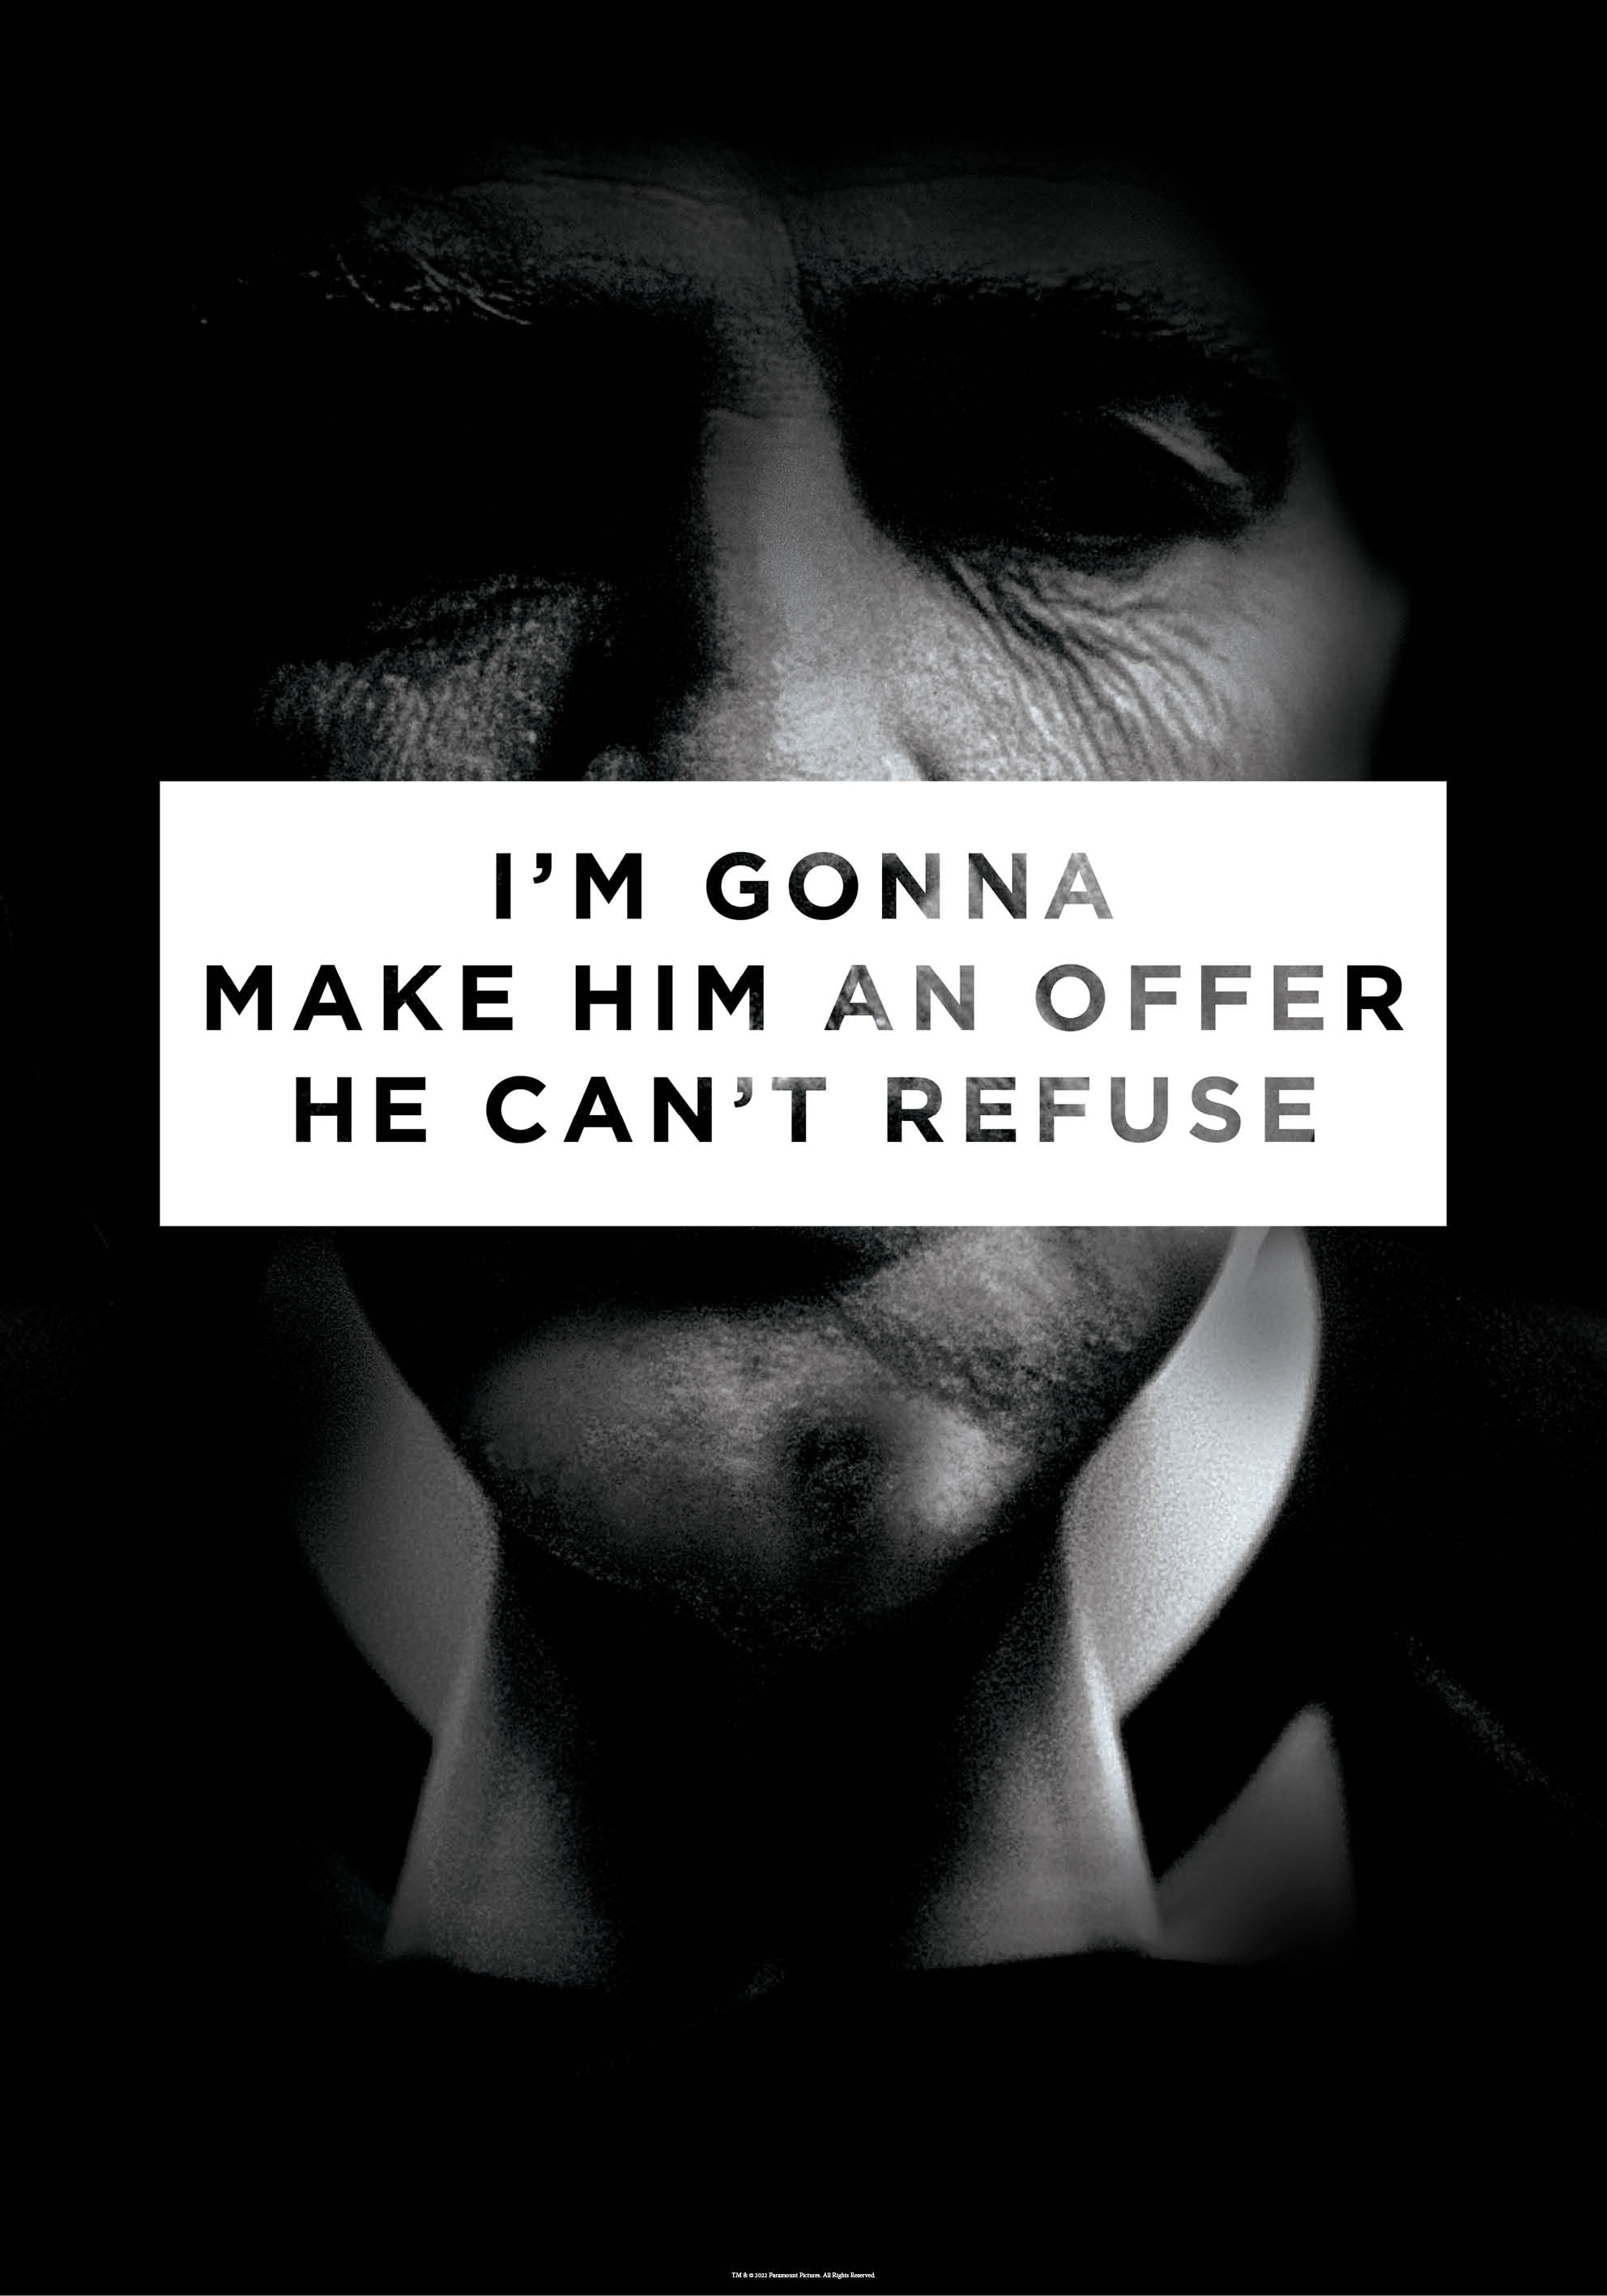 An Offer He Can't Refuse Poster